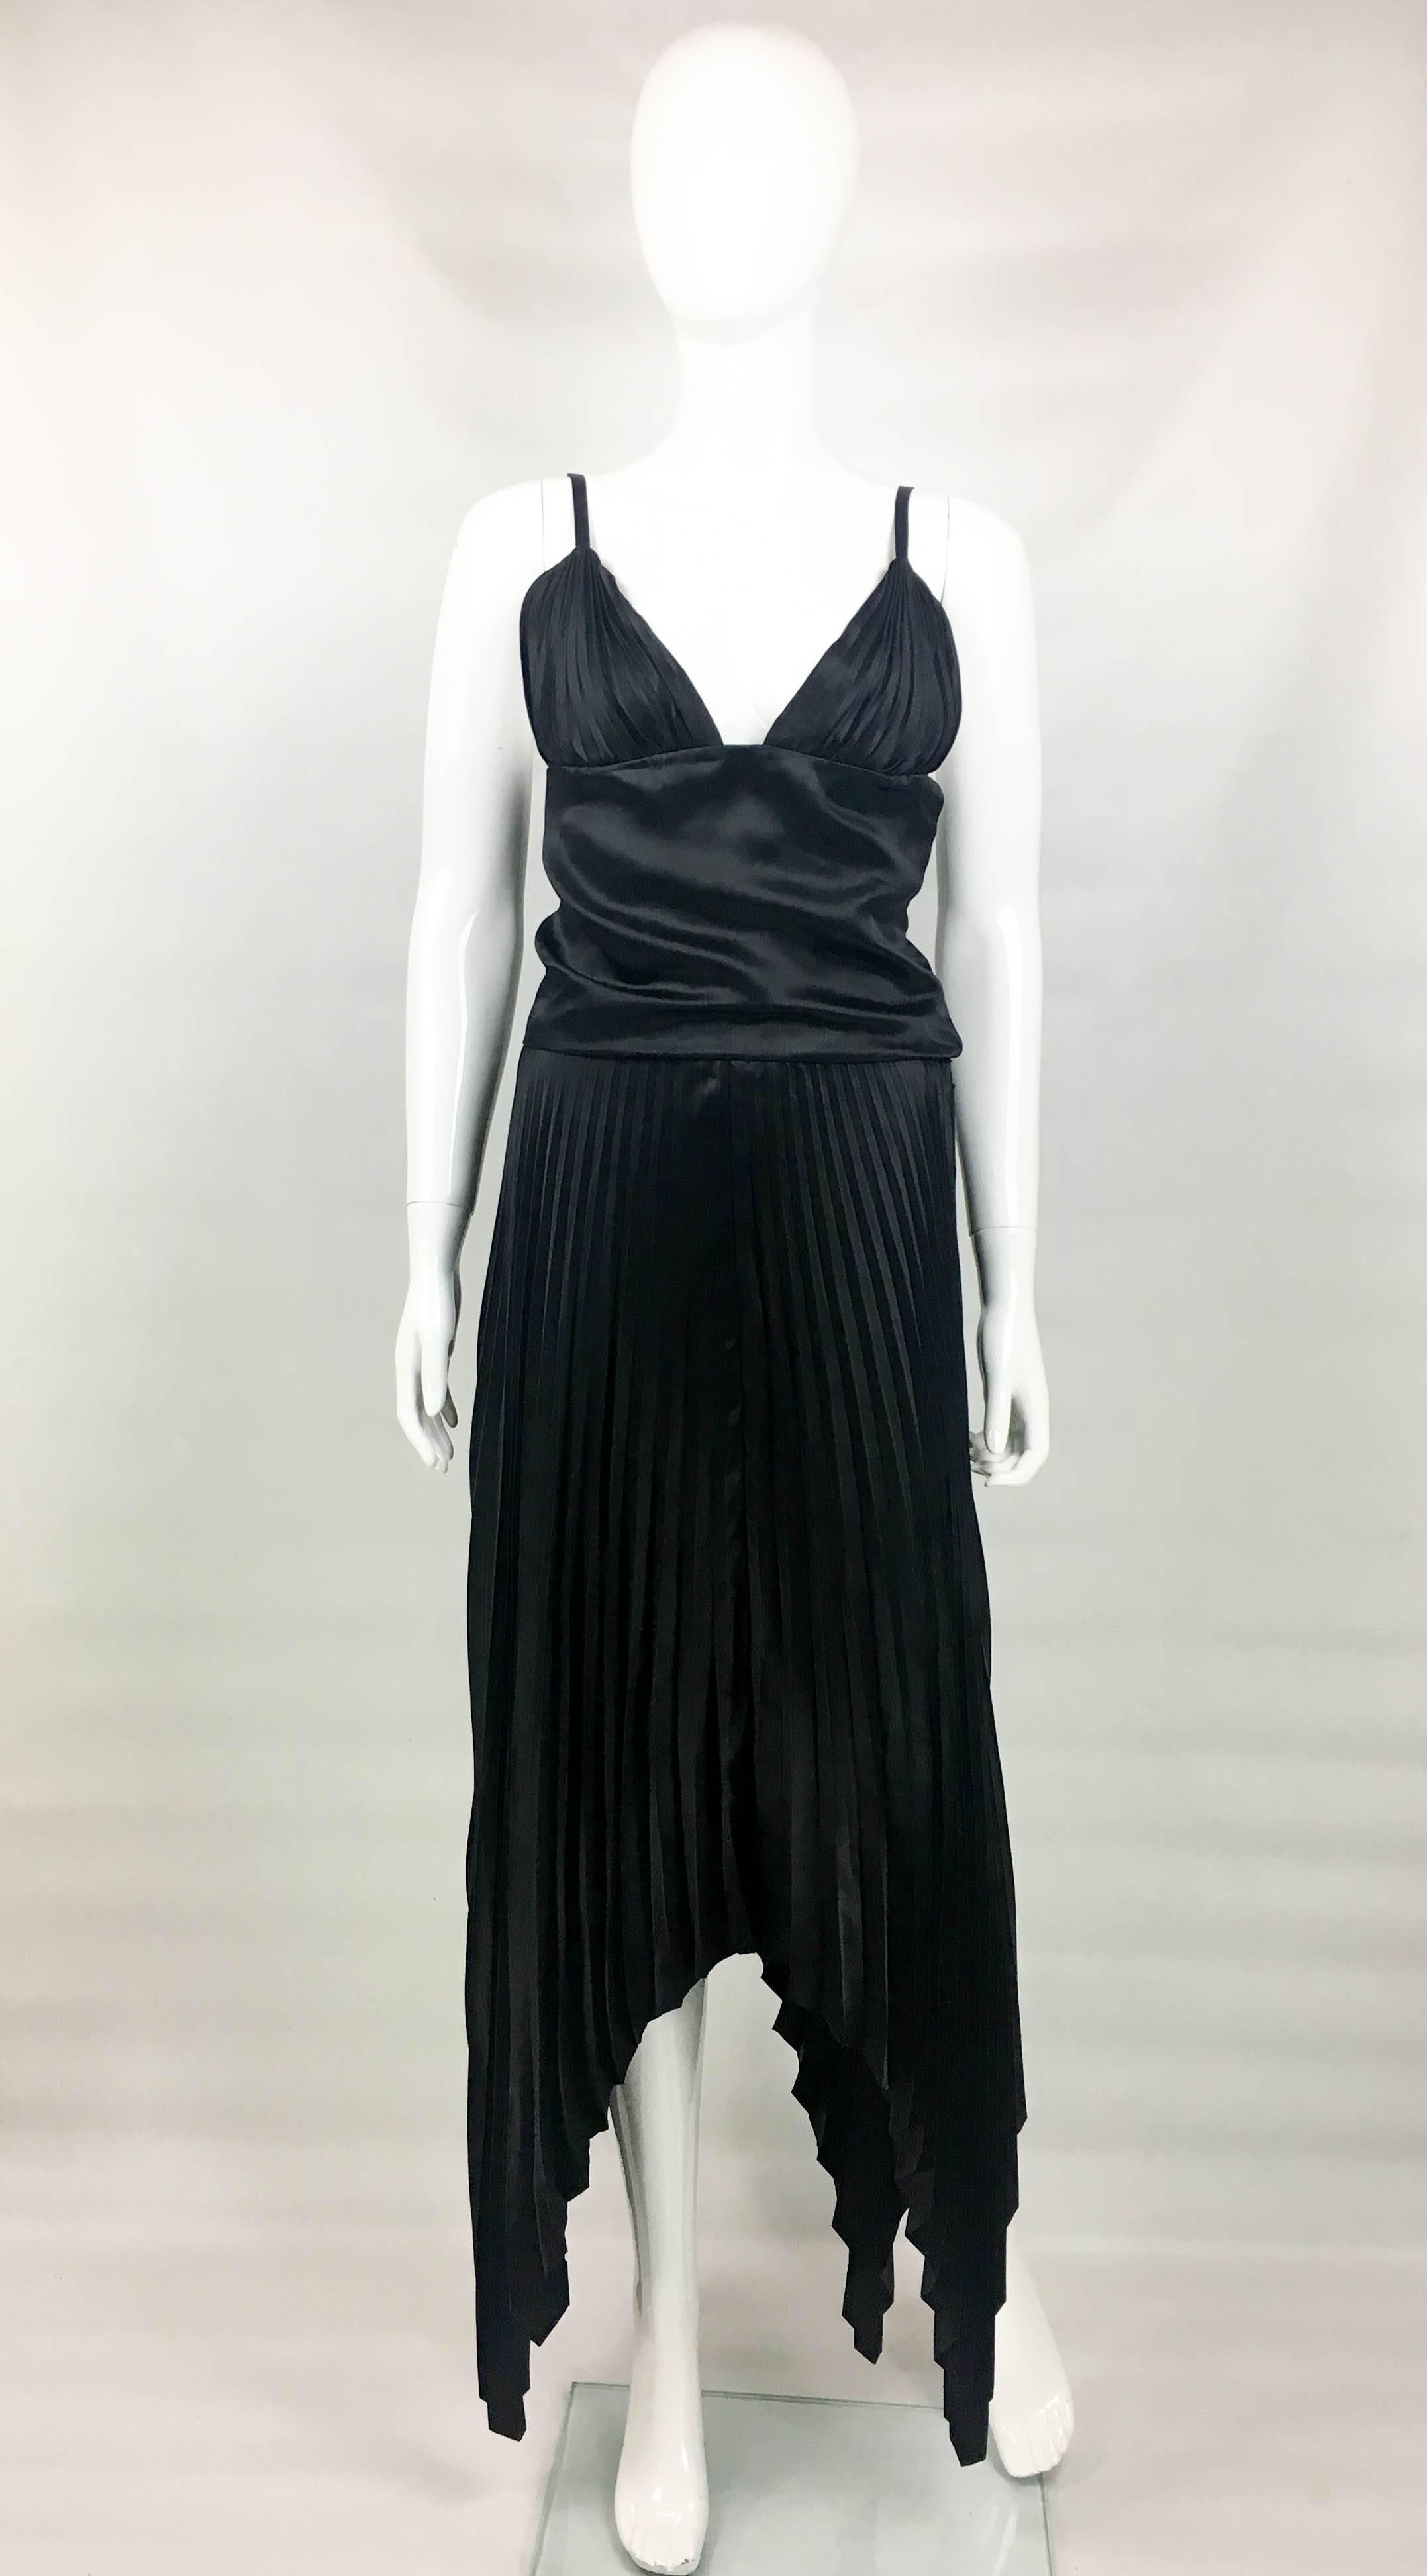 Vintage Dior Haute Couture Black Silk Pleated Dress. This gorgeous dress by Dior was created by Marc Bohan for the 1983 Spring/Summer Haute Couture Collection. Made in black silk, it features pleated skirt, draped torso and pleated bust. It has